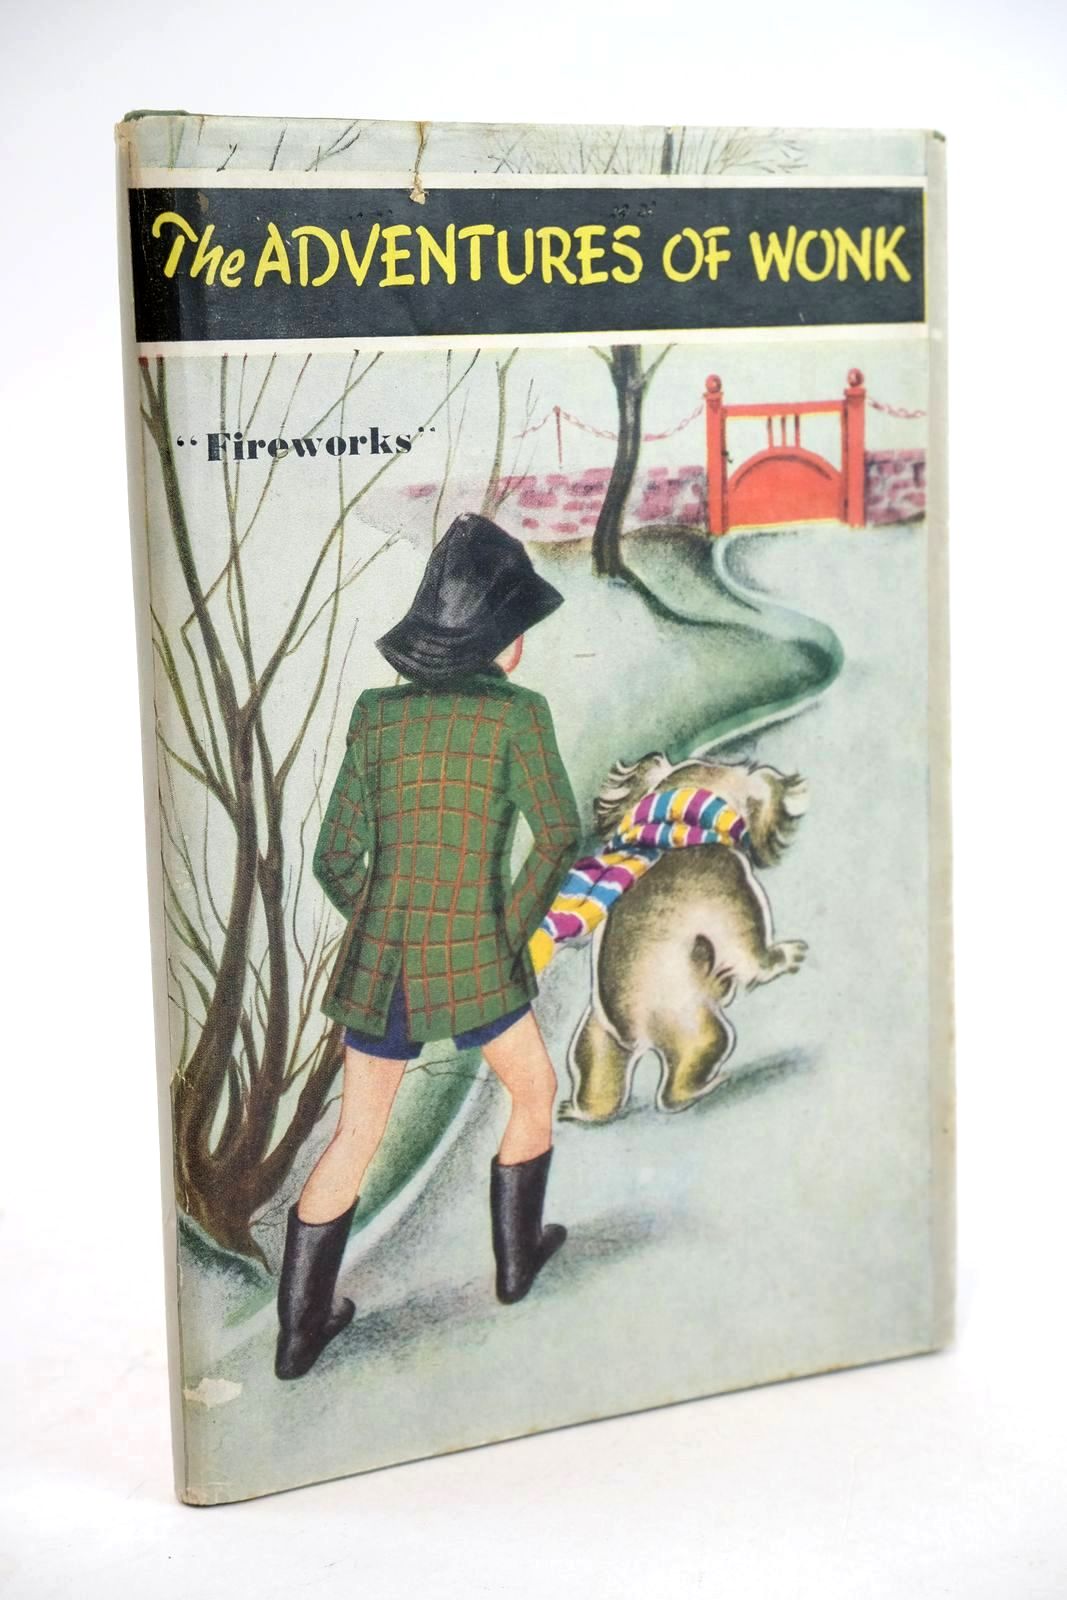 Photo of THE ADVENTURES OF WONK - FIREWORKS written by Levy, Muriel illustrated by Kiddell-Monroe, Joan published by Wills &amp; Hepworth Ltd. (STOCK CODE: 1324391)  for sale by Stella & Rose's Books